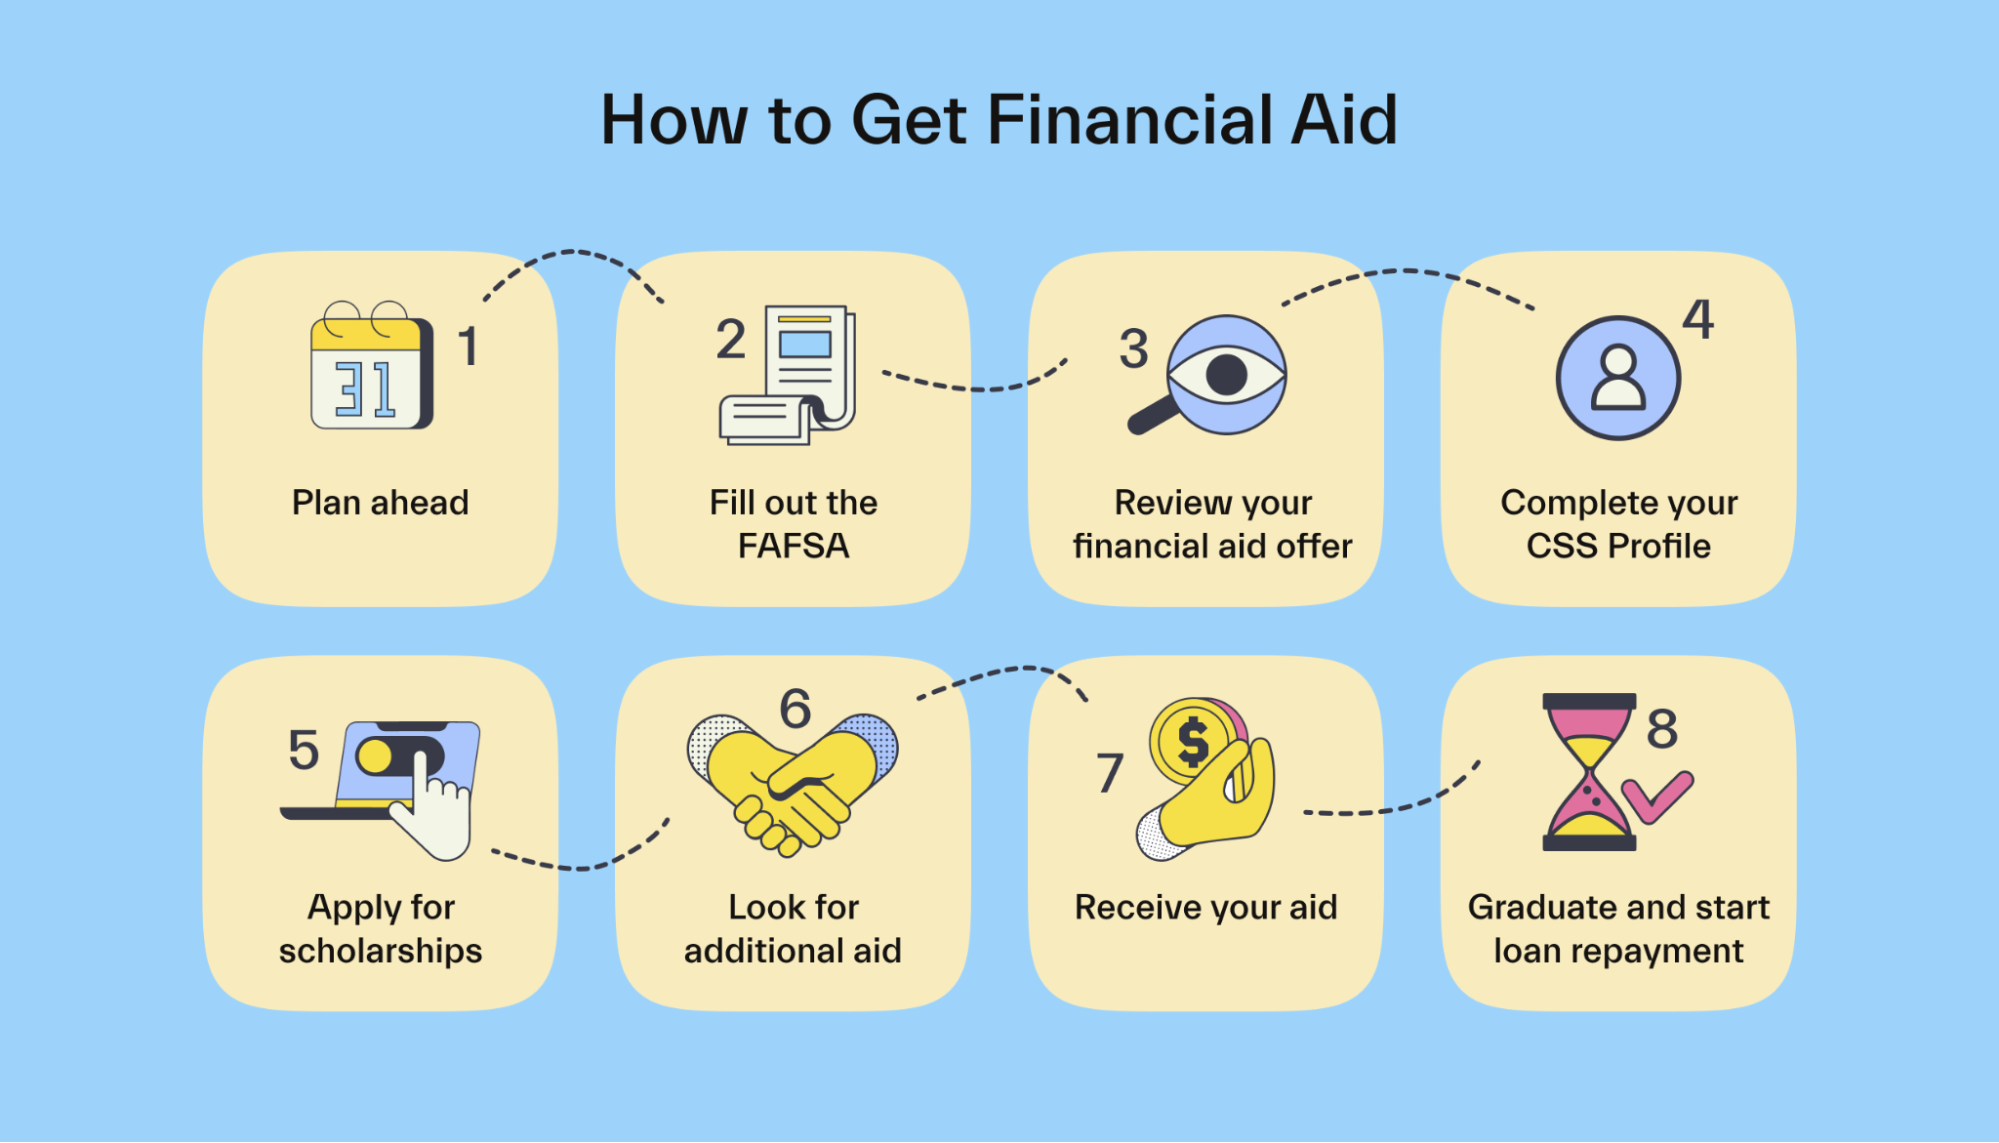 How to Get Financial Aid